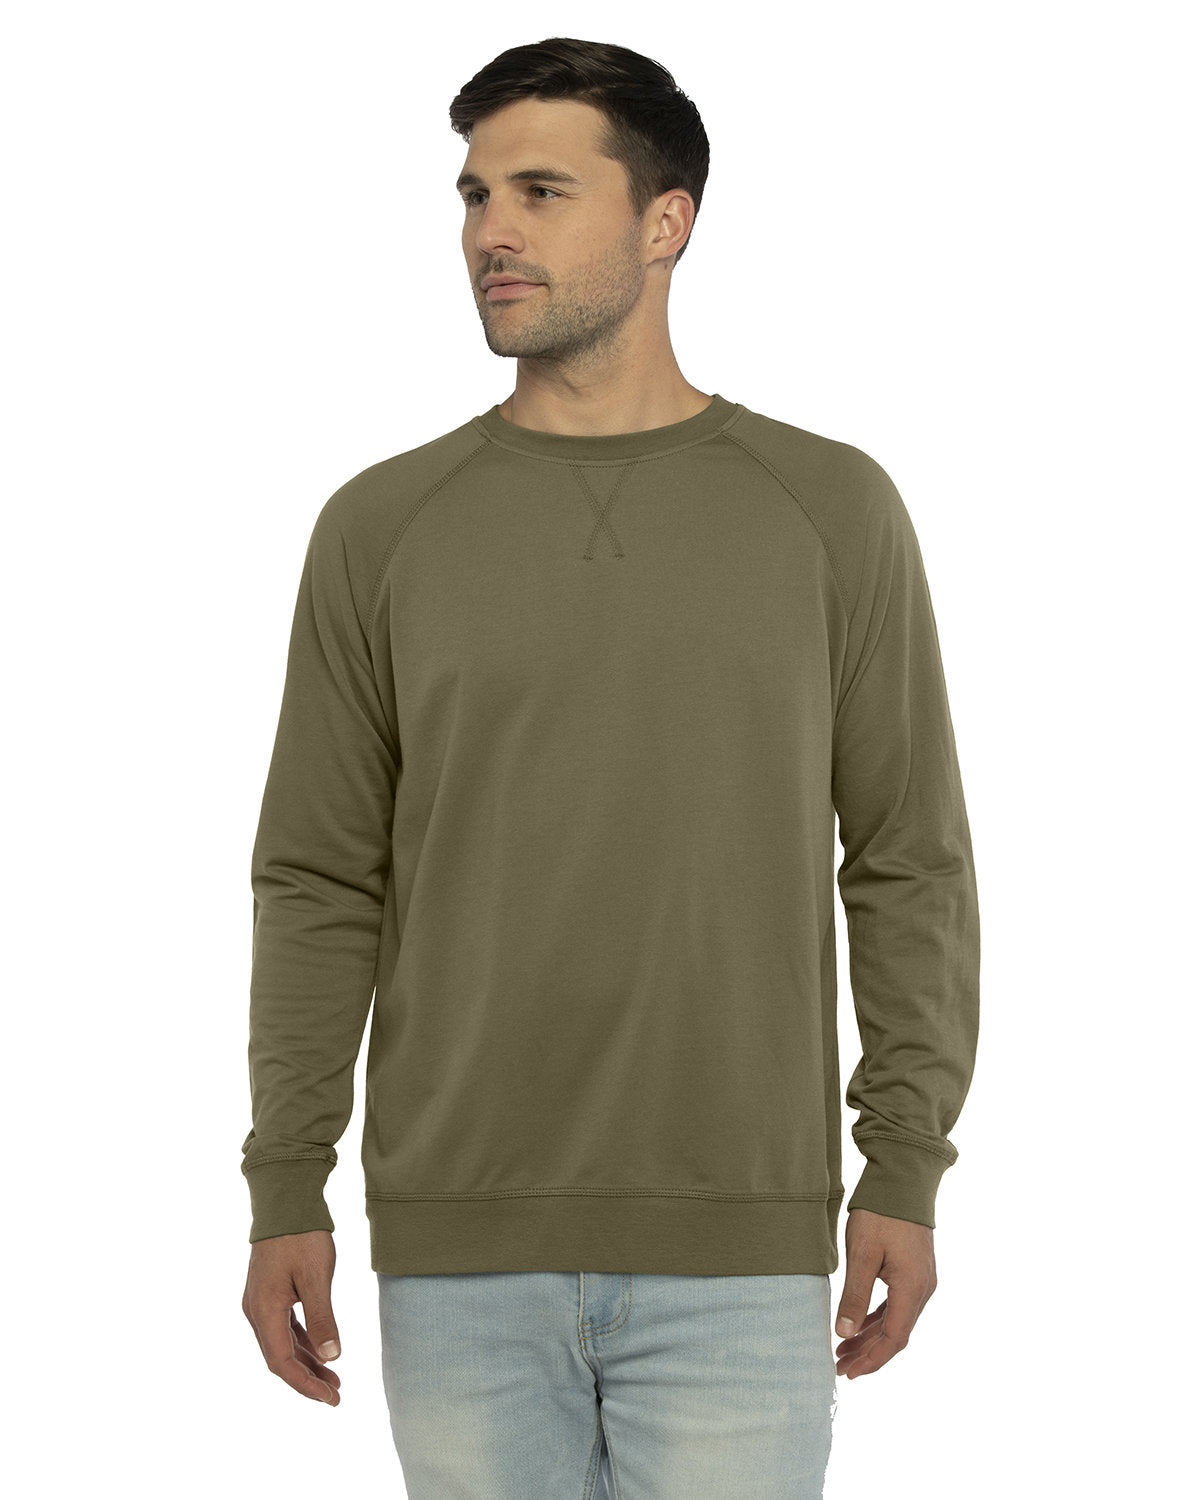 N9000-Next Level Apparel-MILITARY GREEN